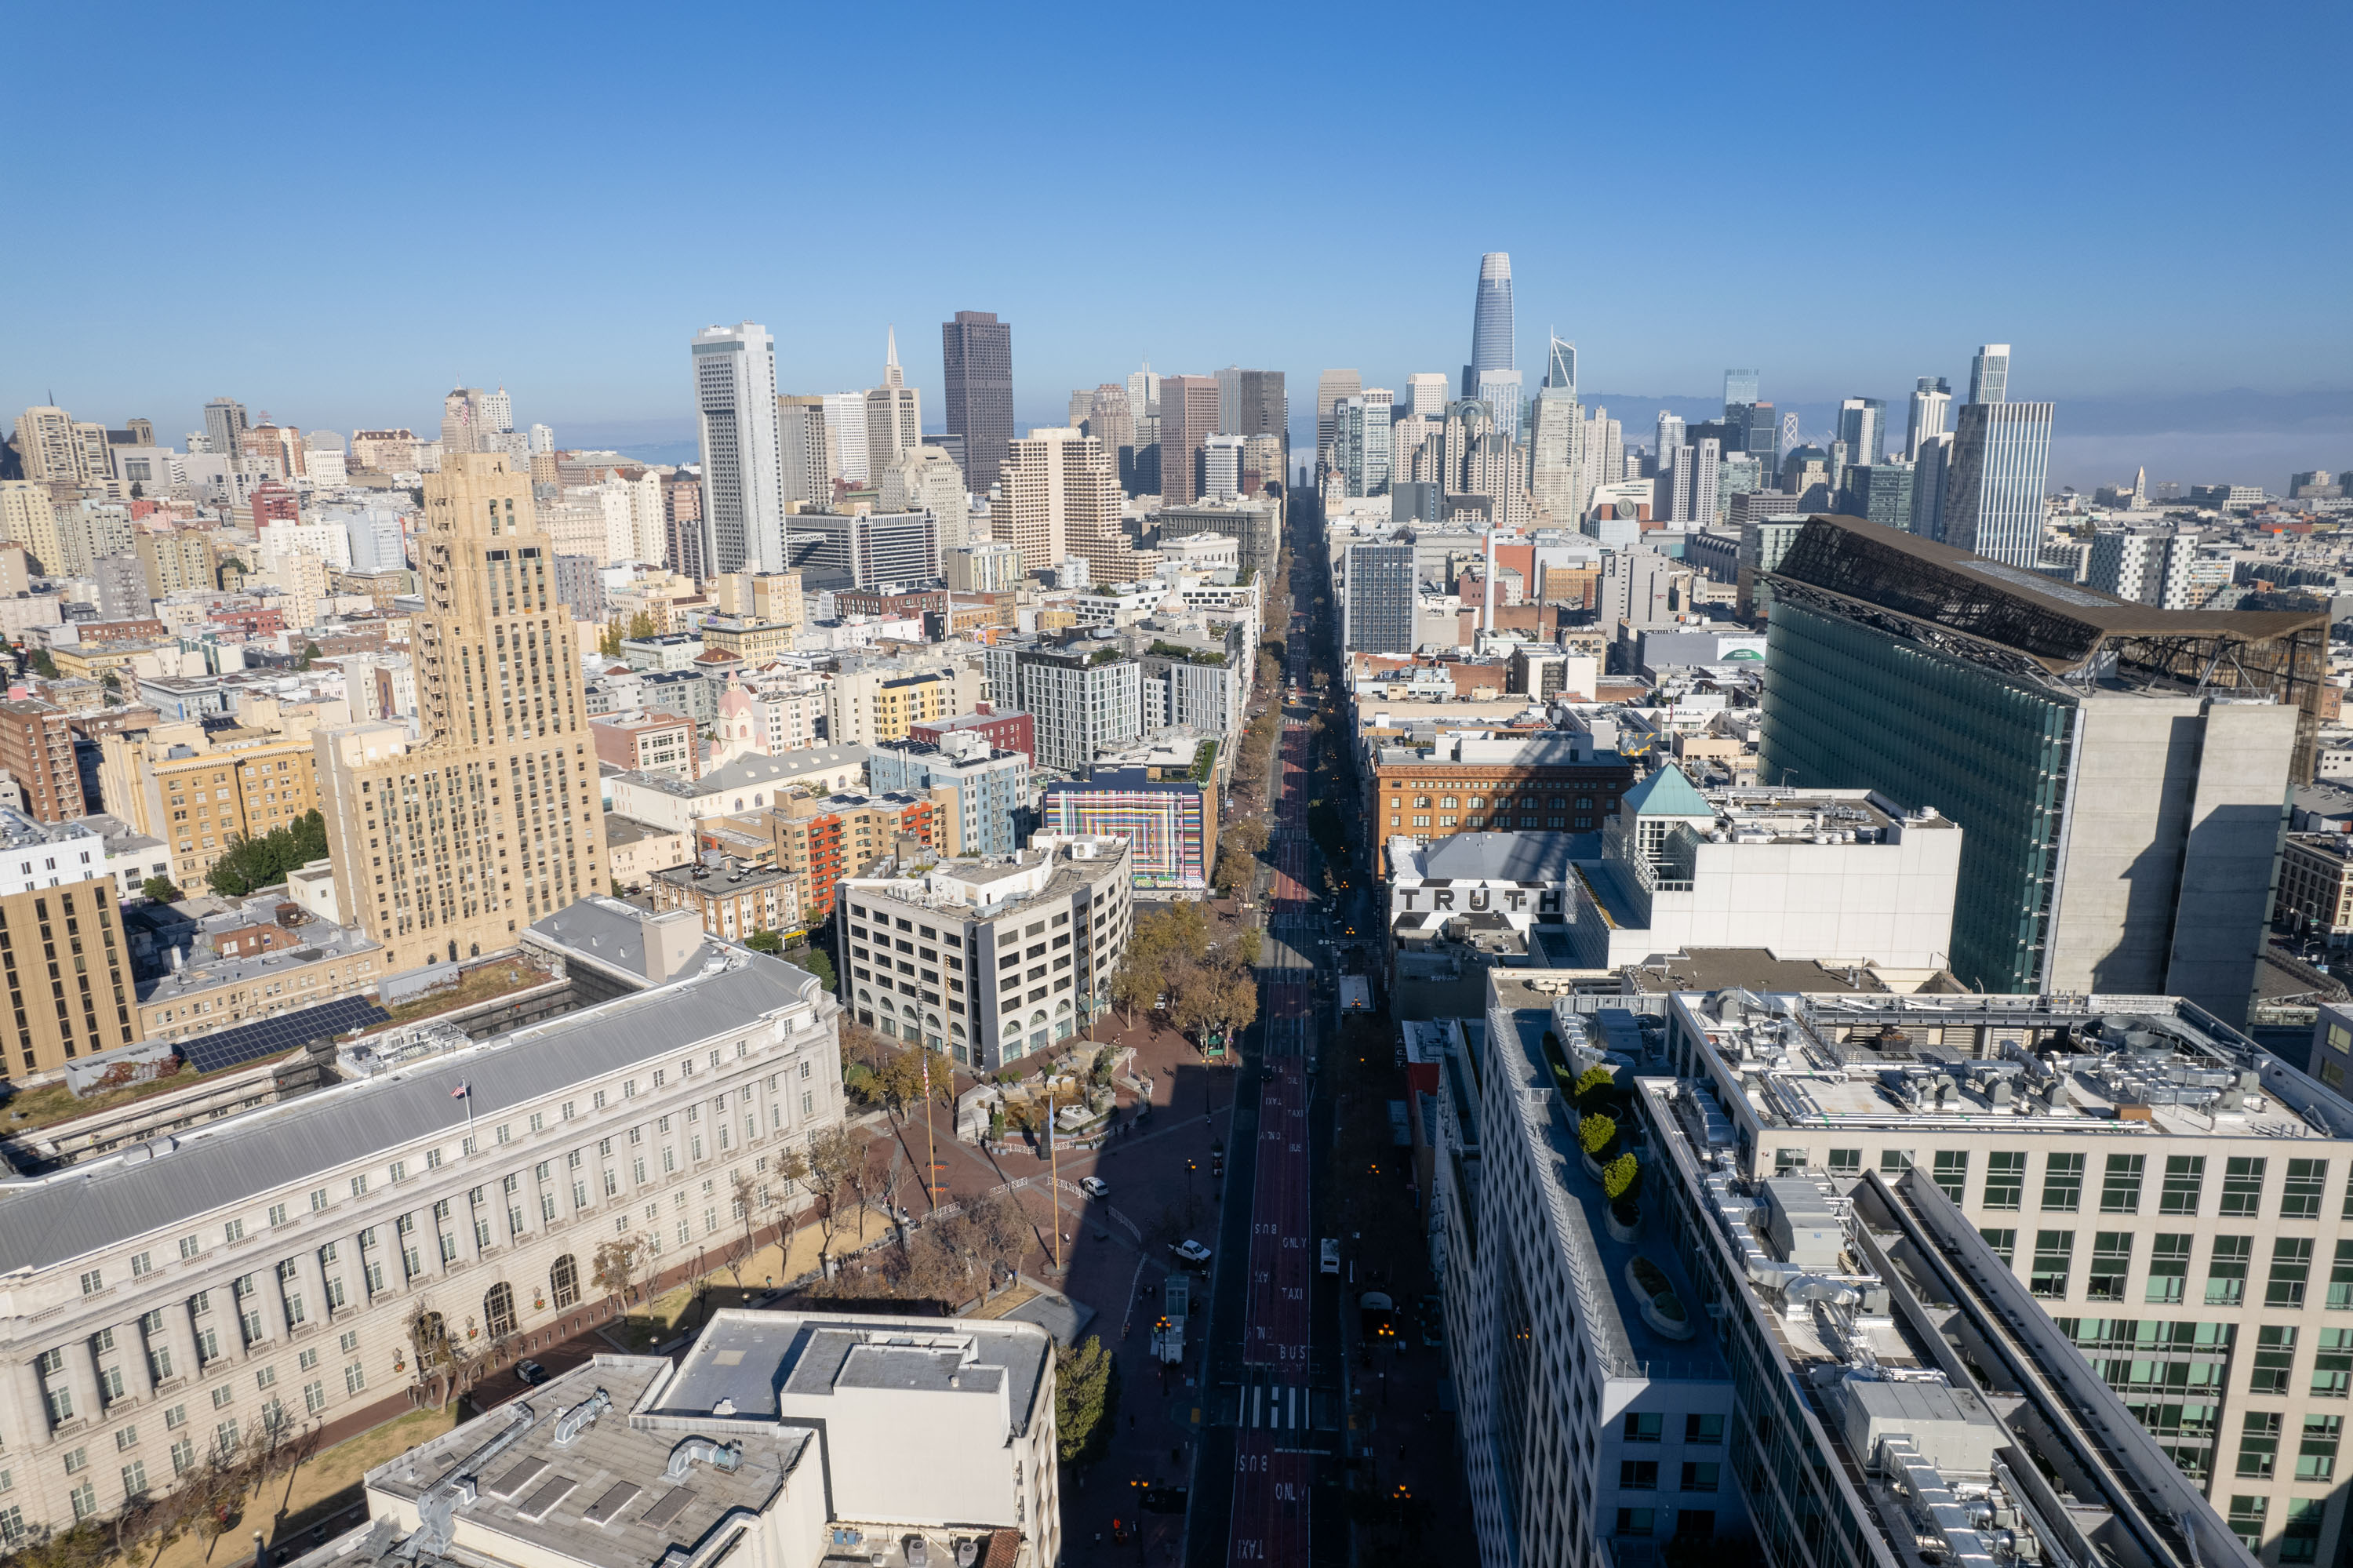 An aerial view of Market street with buildings on both sides and the San Francisco City Skyline.